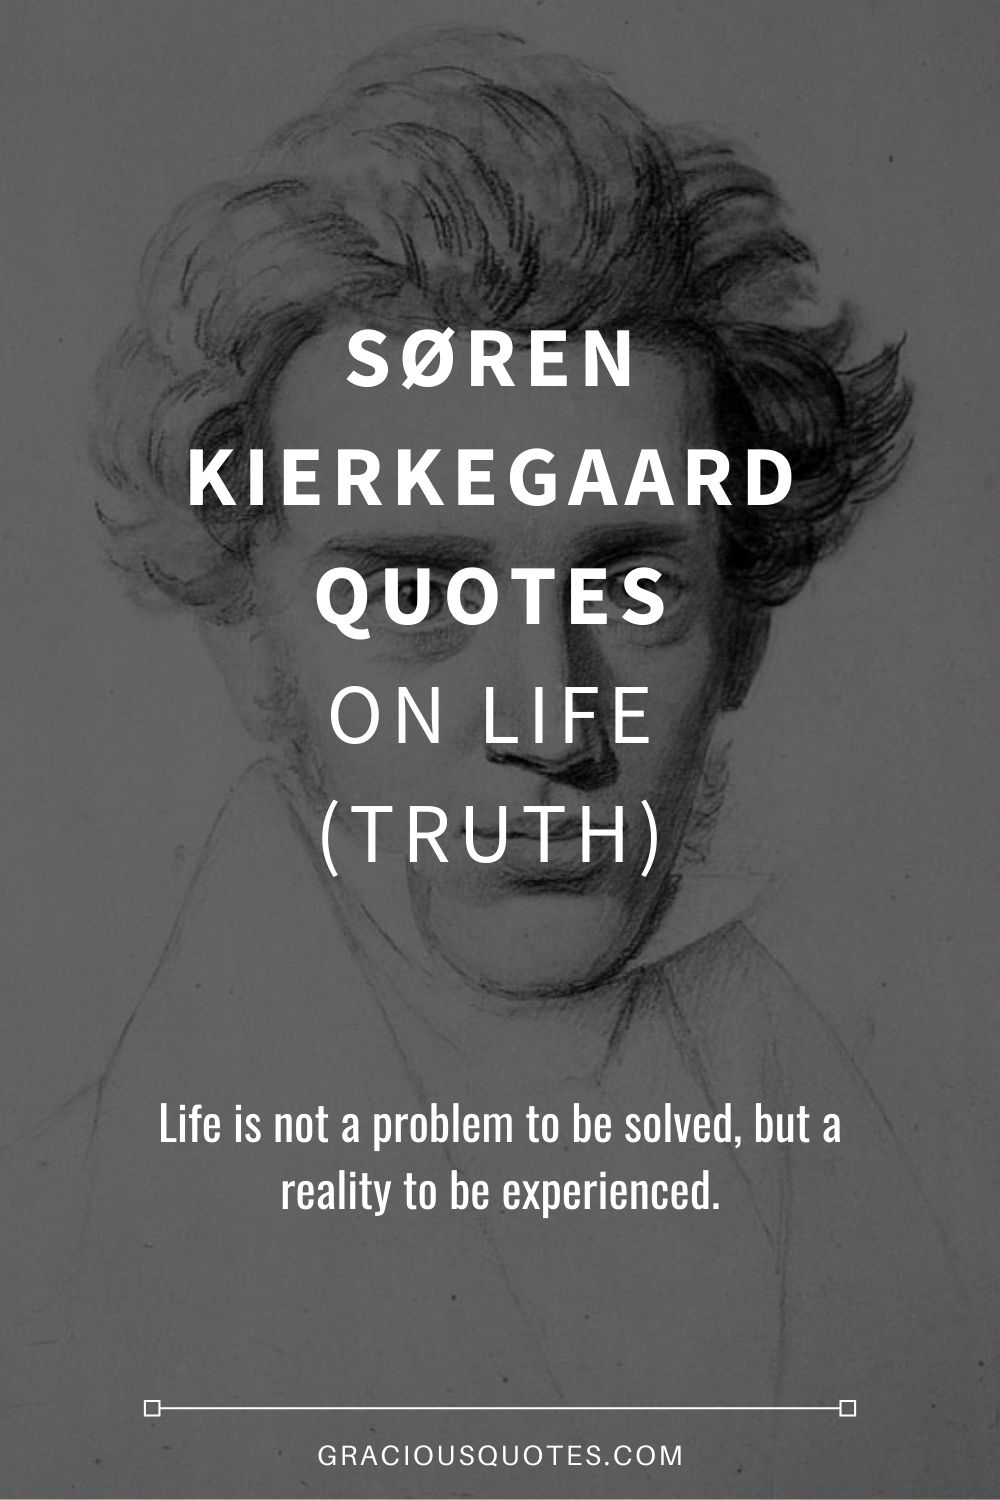 Søren Kierkegaard Quotes on Life (TRUTH) - Gracious Quotes